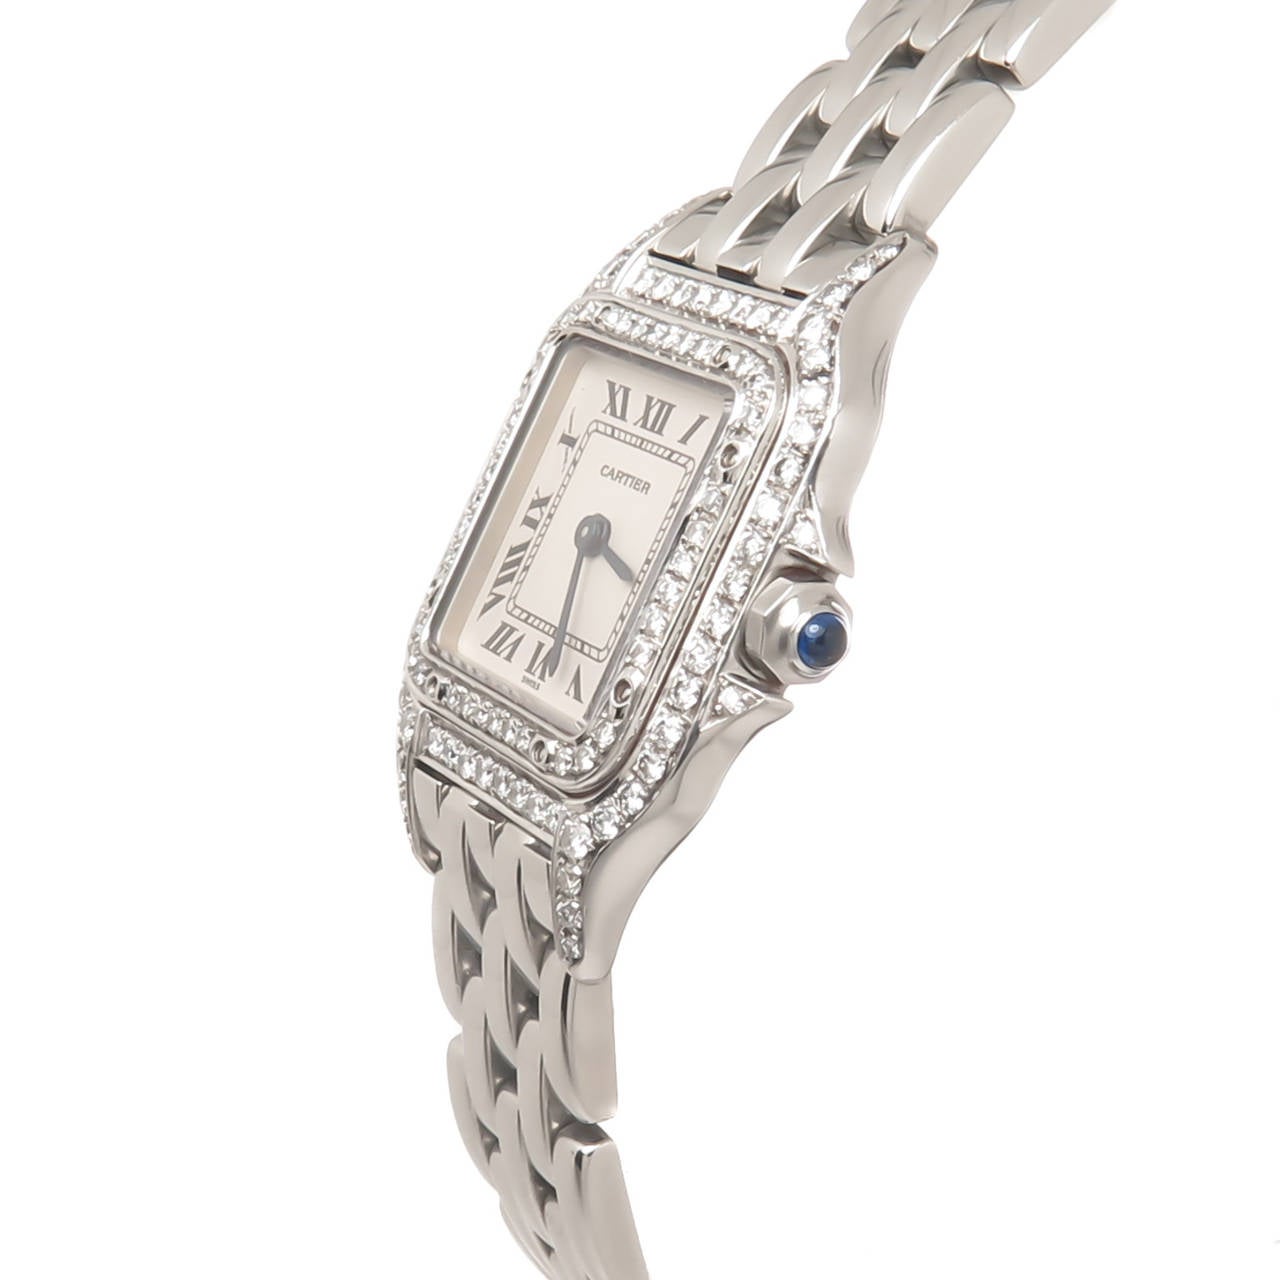 Cartier Lady's Stainless Steel Diamond Panther Quartz Wristwatch at 1stdibs